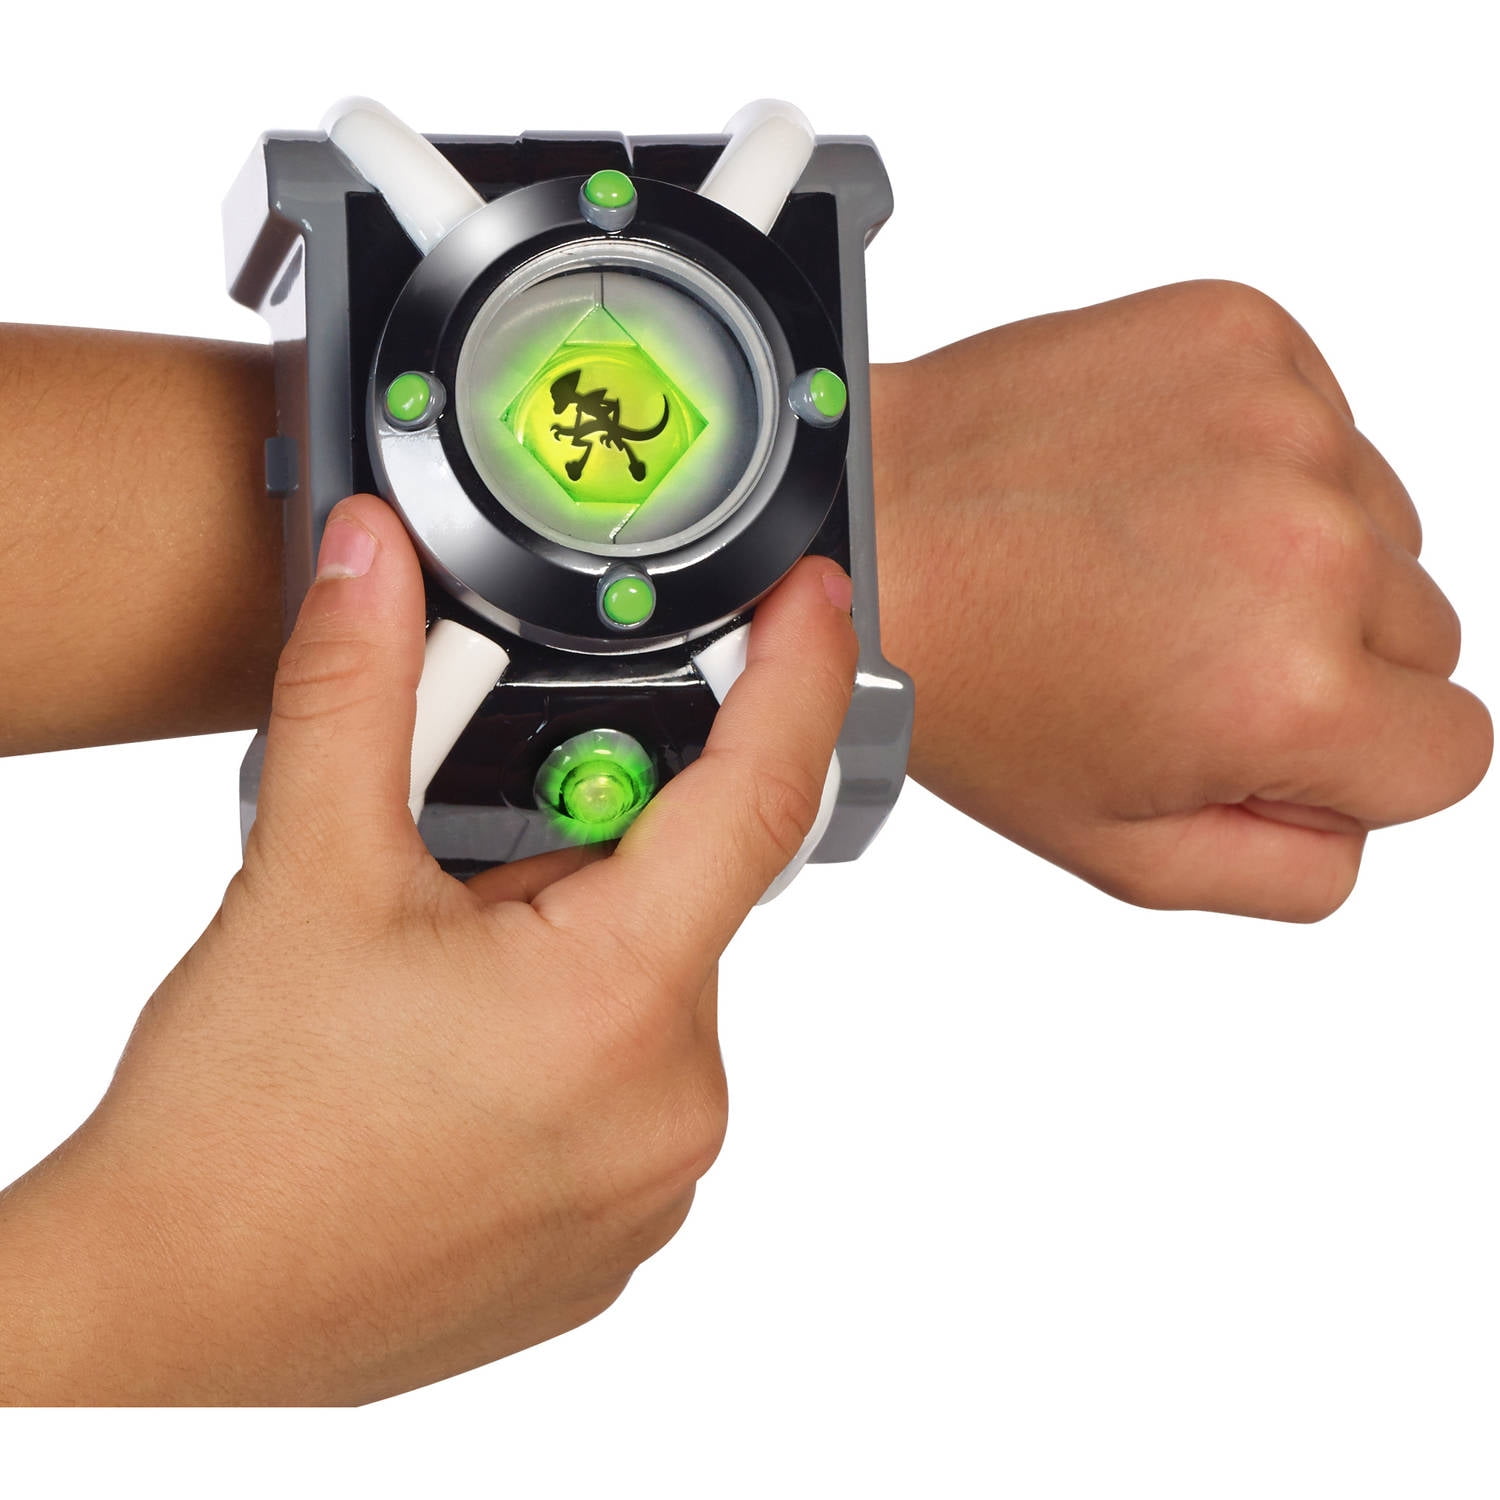 Amazon.com: Projector Watch Kids Toys for Ben 10 Alien Force and Mysterious  Projection Action Figures Model Toy for Kids Party Supplies : Toys & Games